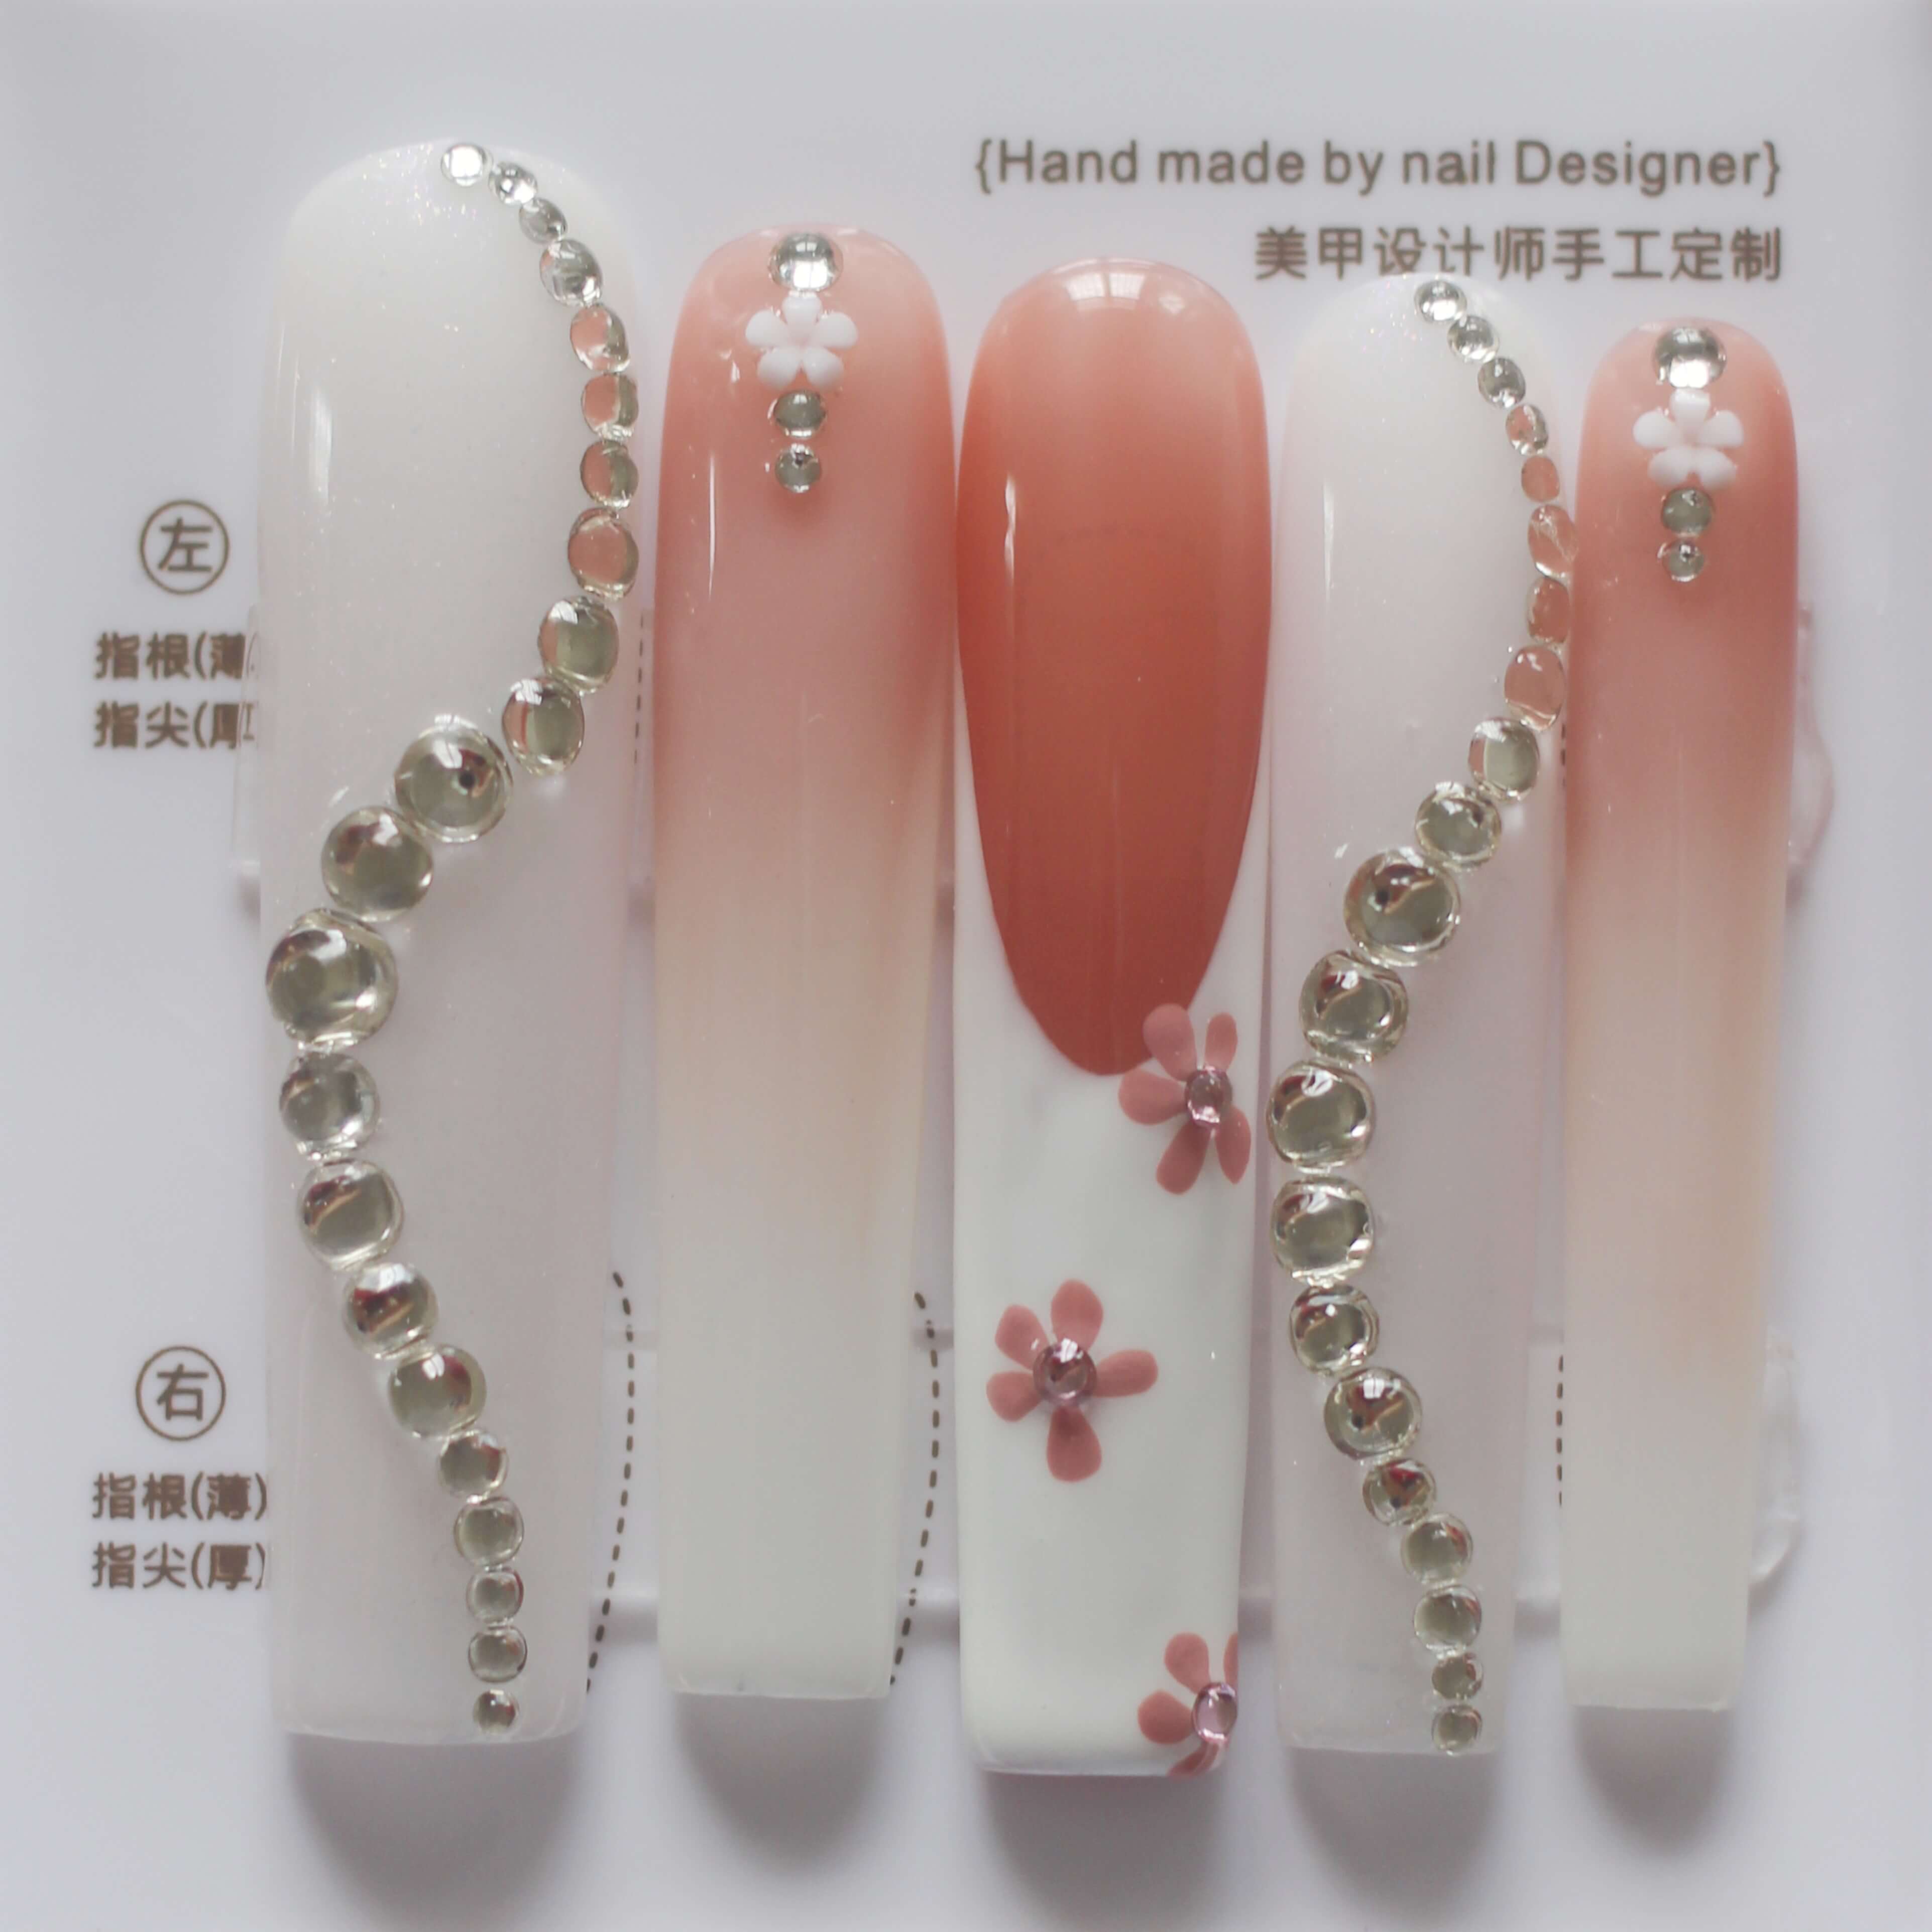 Vibeficant Progel Pink Ombre Handmade Gel Press on Nails Extra Long Coffin Rhinestone with Flower 